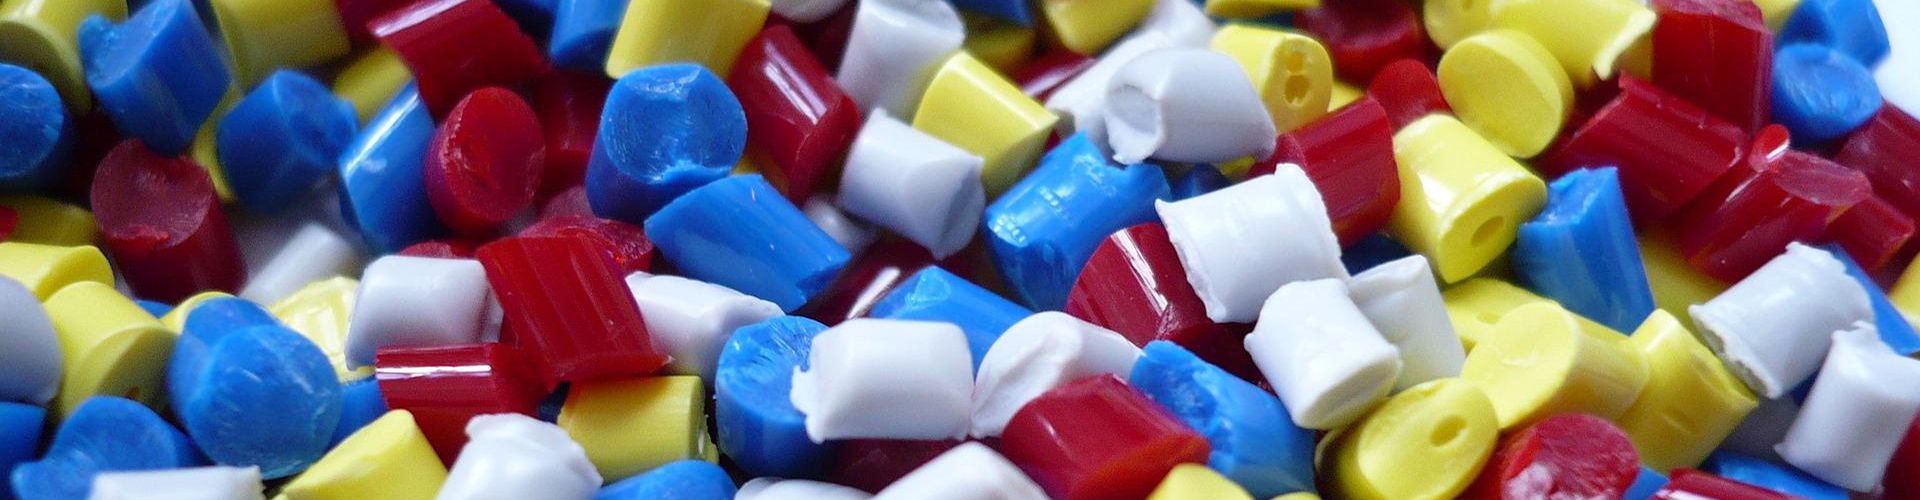 Pile of little pieces of yellow, red, blue and white plastic.